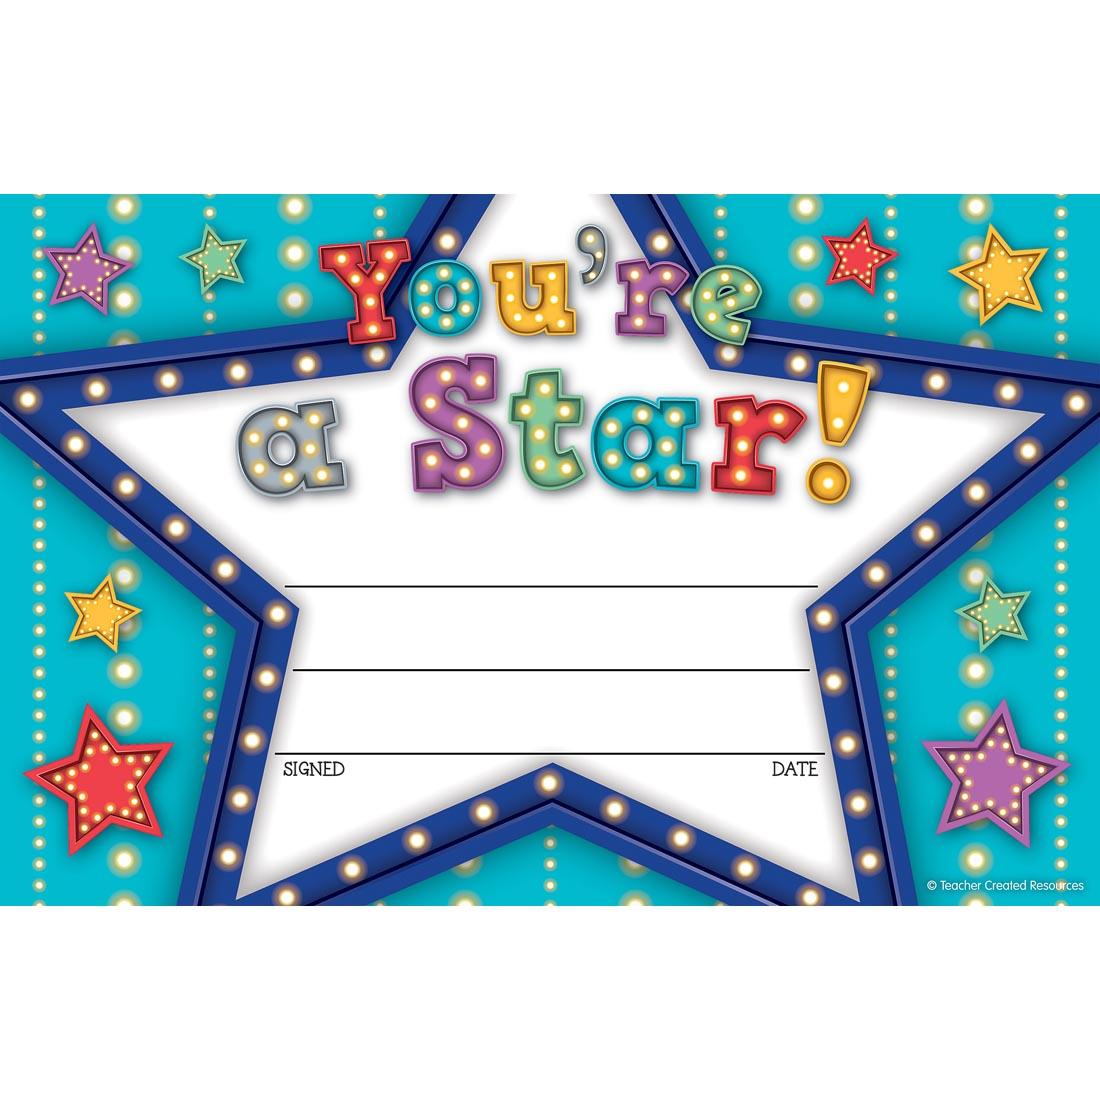 You're a Star Award from the Marquee collection by Teacher Created Resources